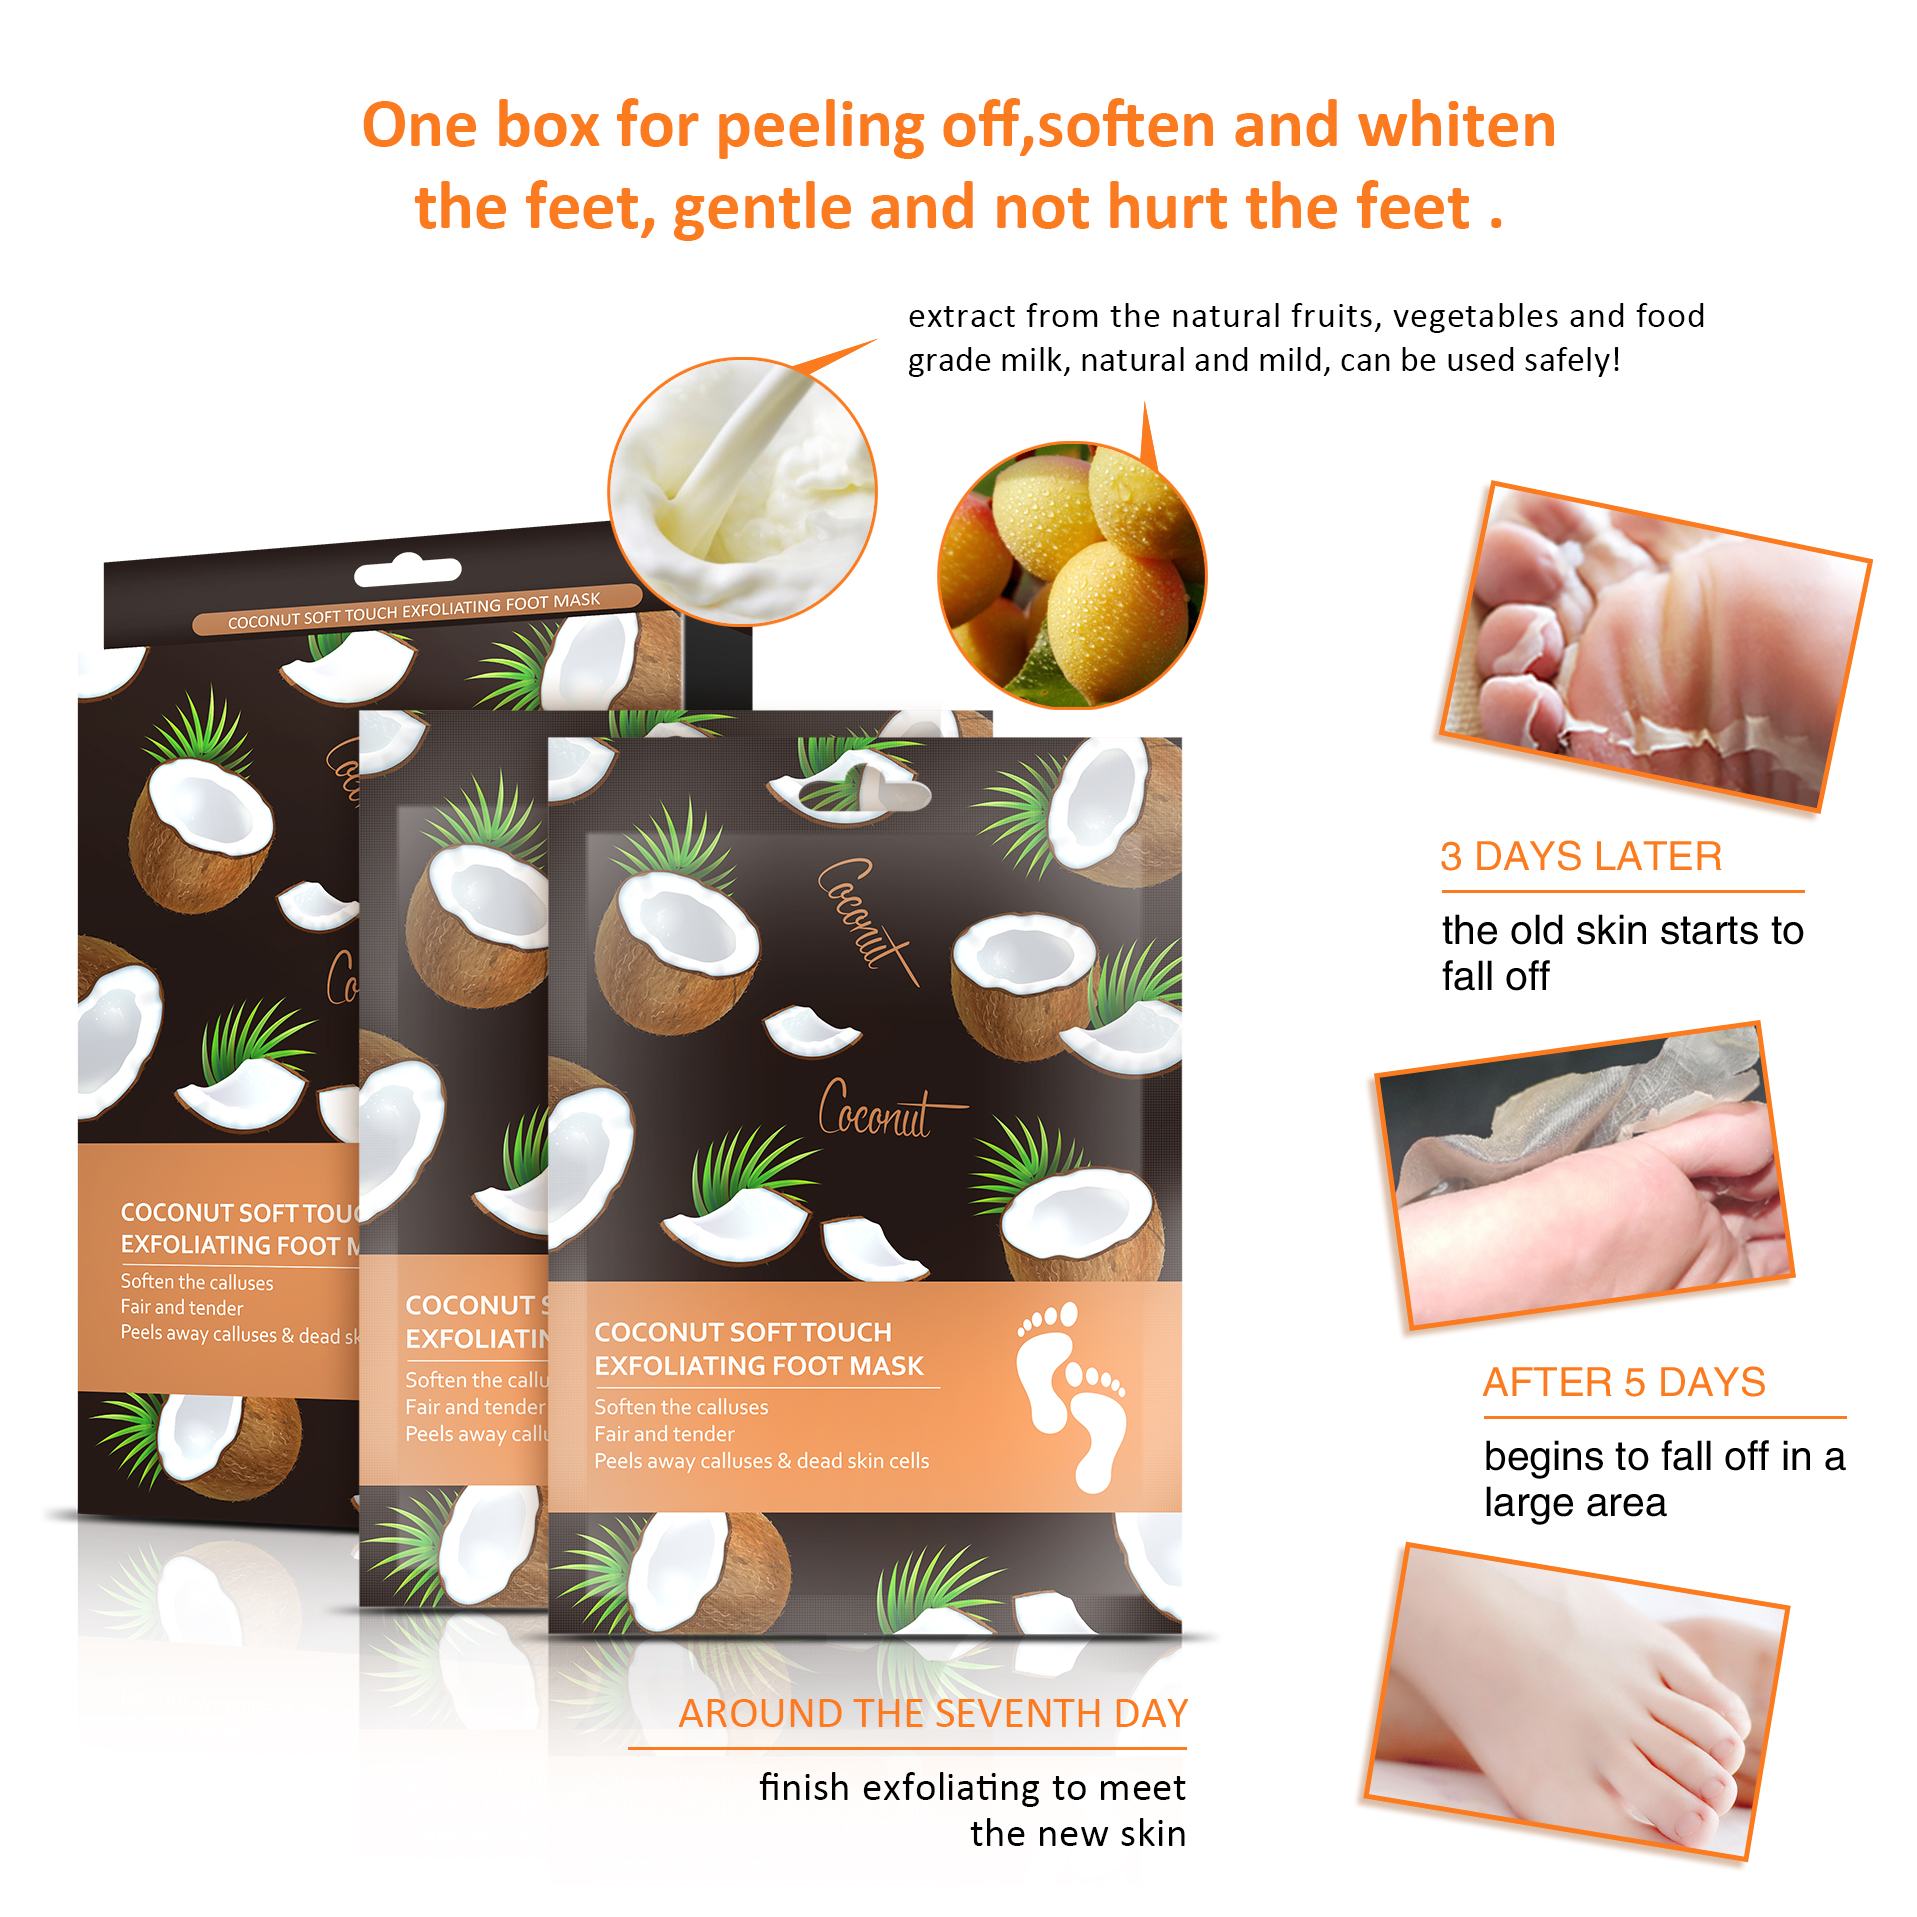 Coconut Exfoliating Foot Mask for Women and Men Feet Peeling Mask Exfoliating By LIRAINHAN